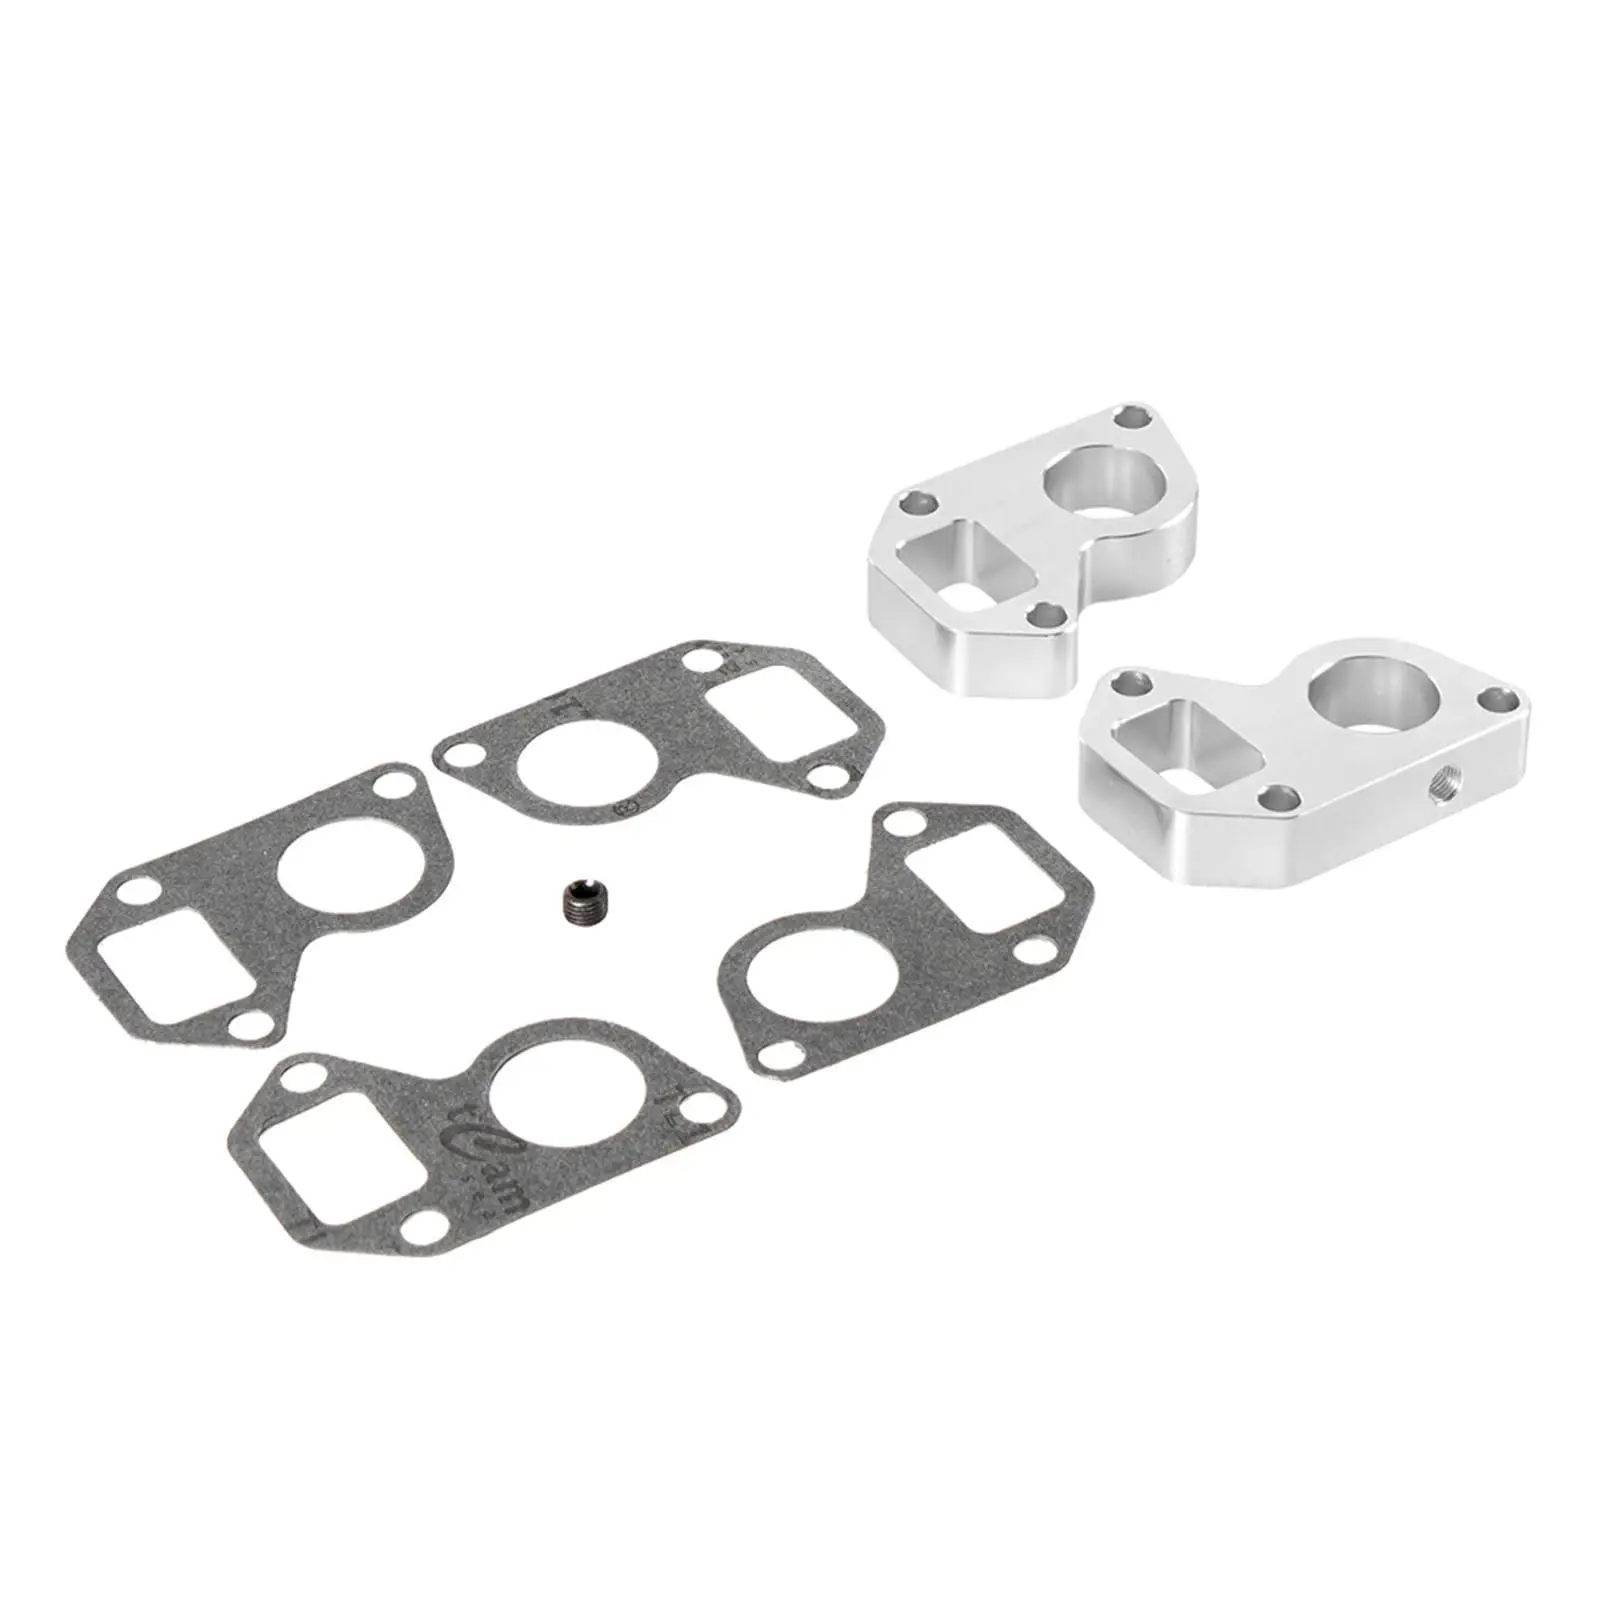 1 Set Water Pump Spacers Adapter Swap Kit Fit for LS Accessories Parts